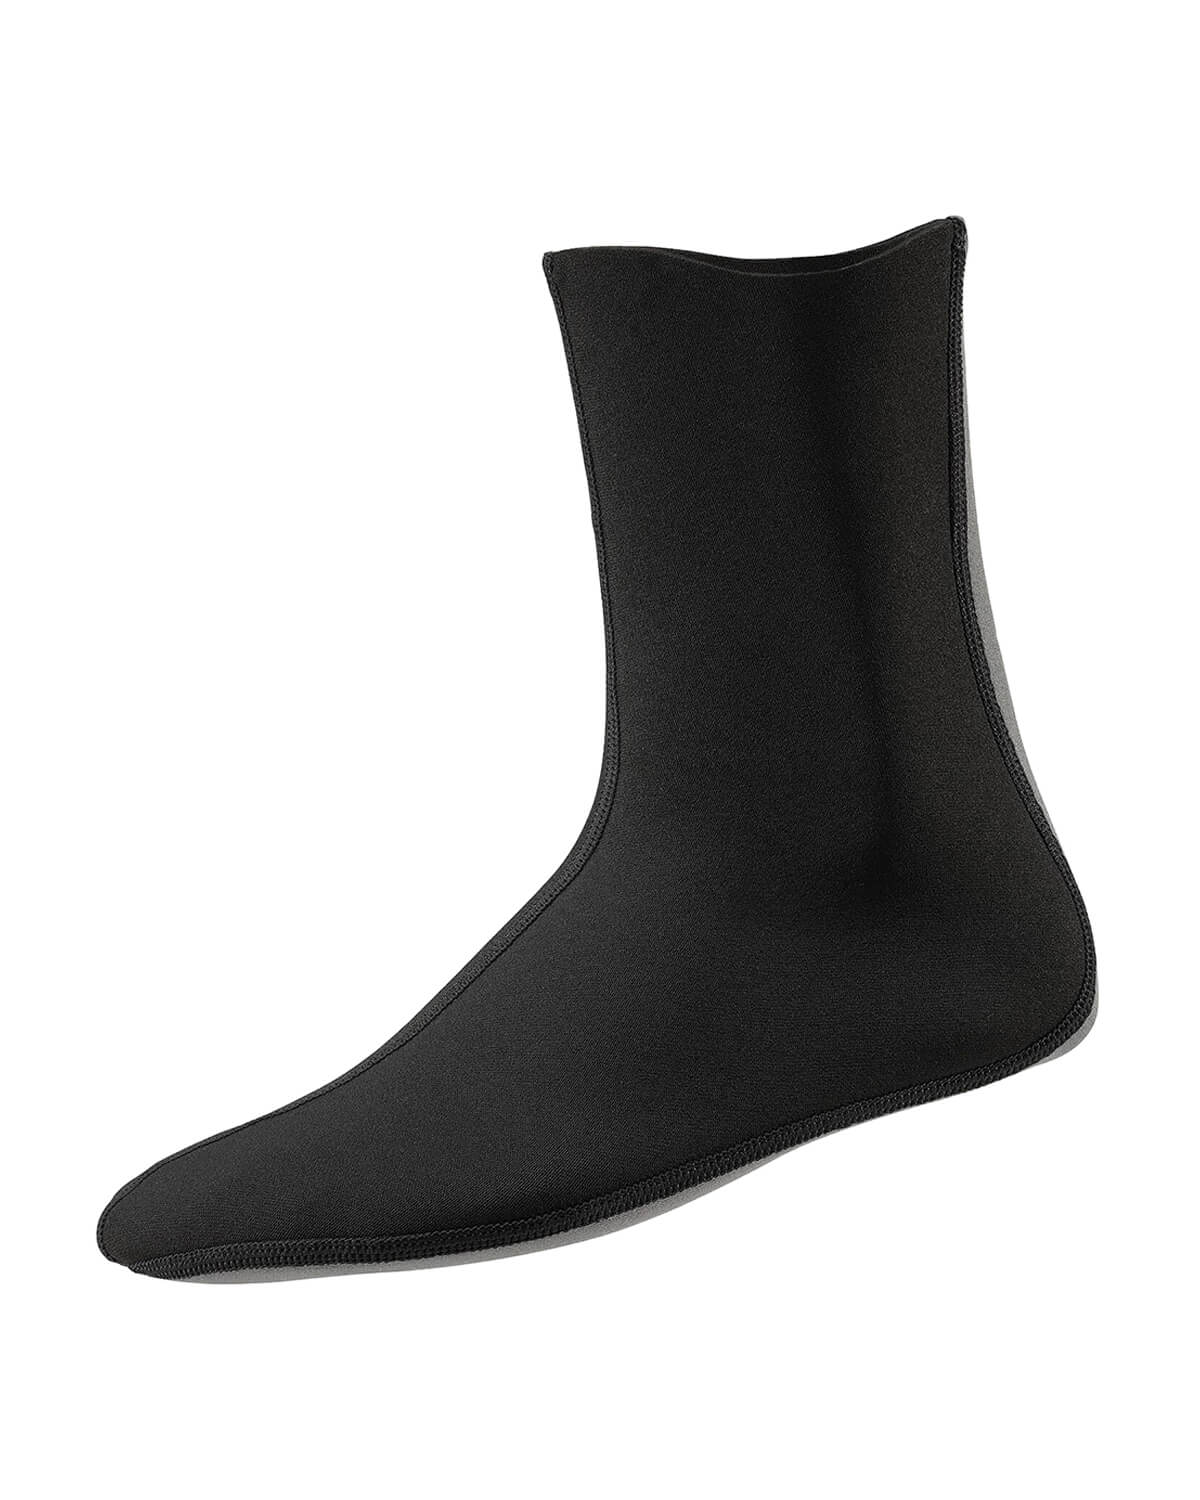 2mm NRS Outfitter Socks | Wetsuit Wearhouse